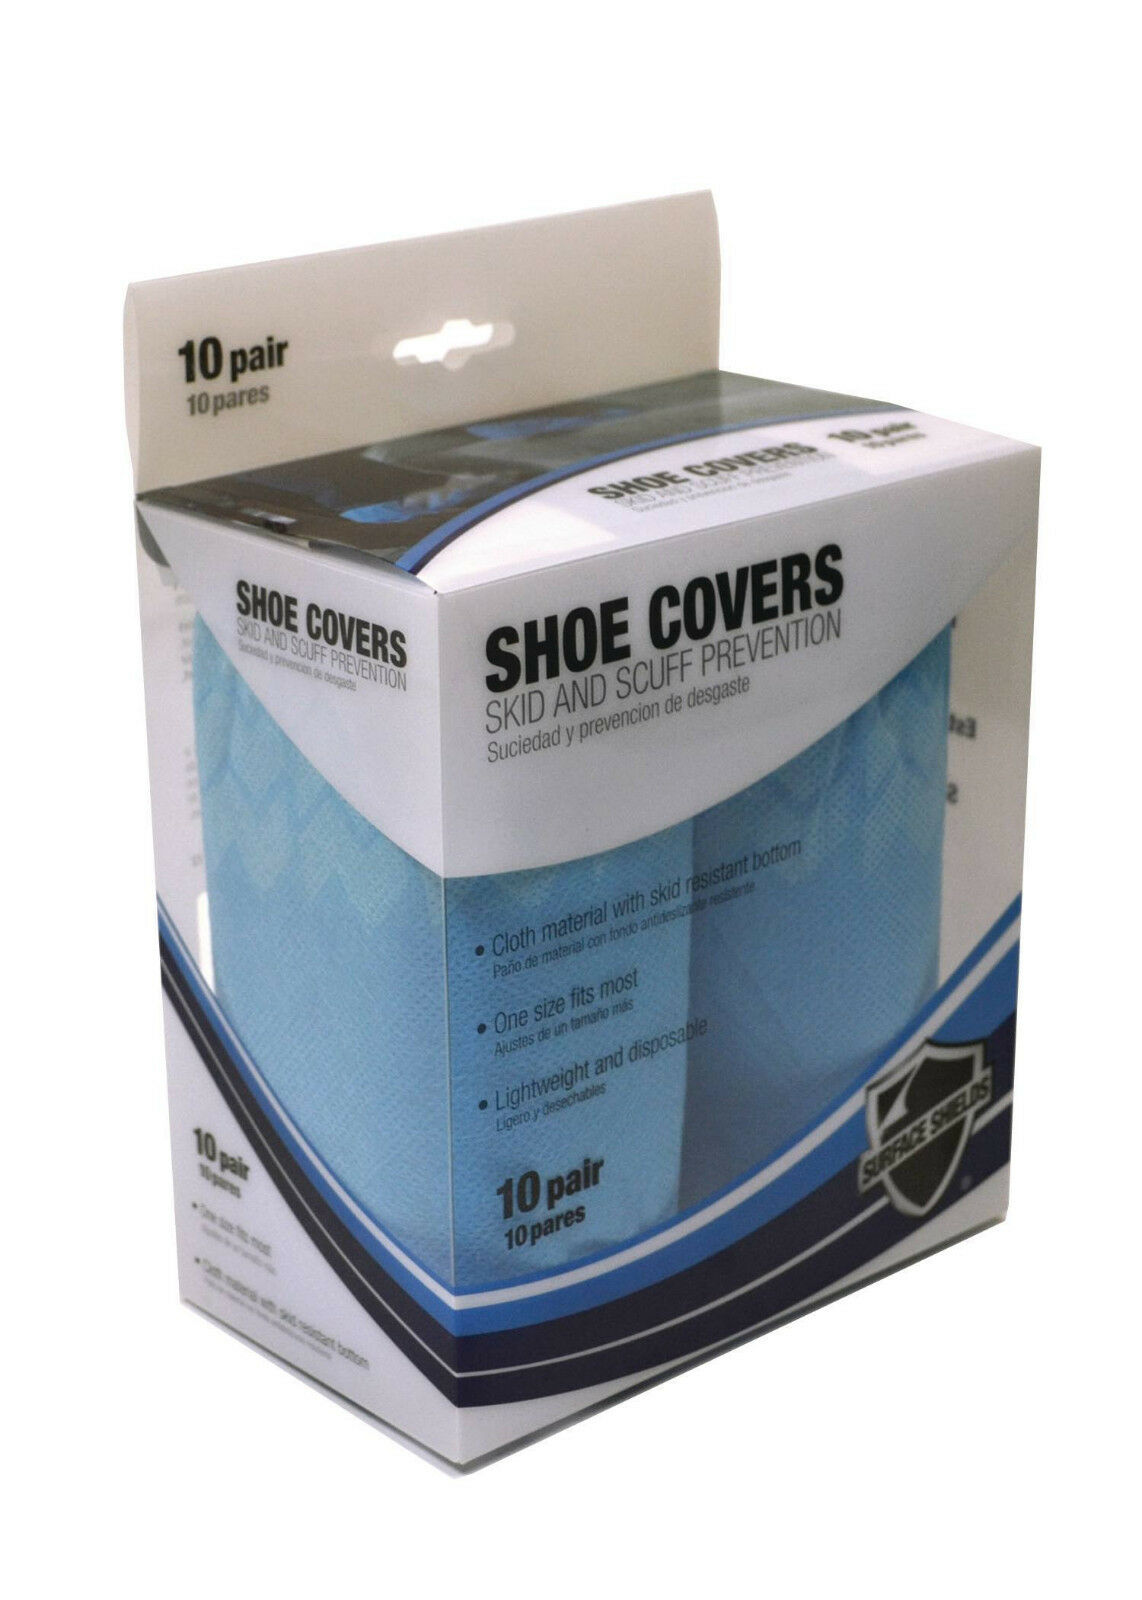 SHOECOVER - Surface Shields Show Covers